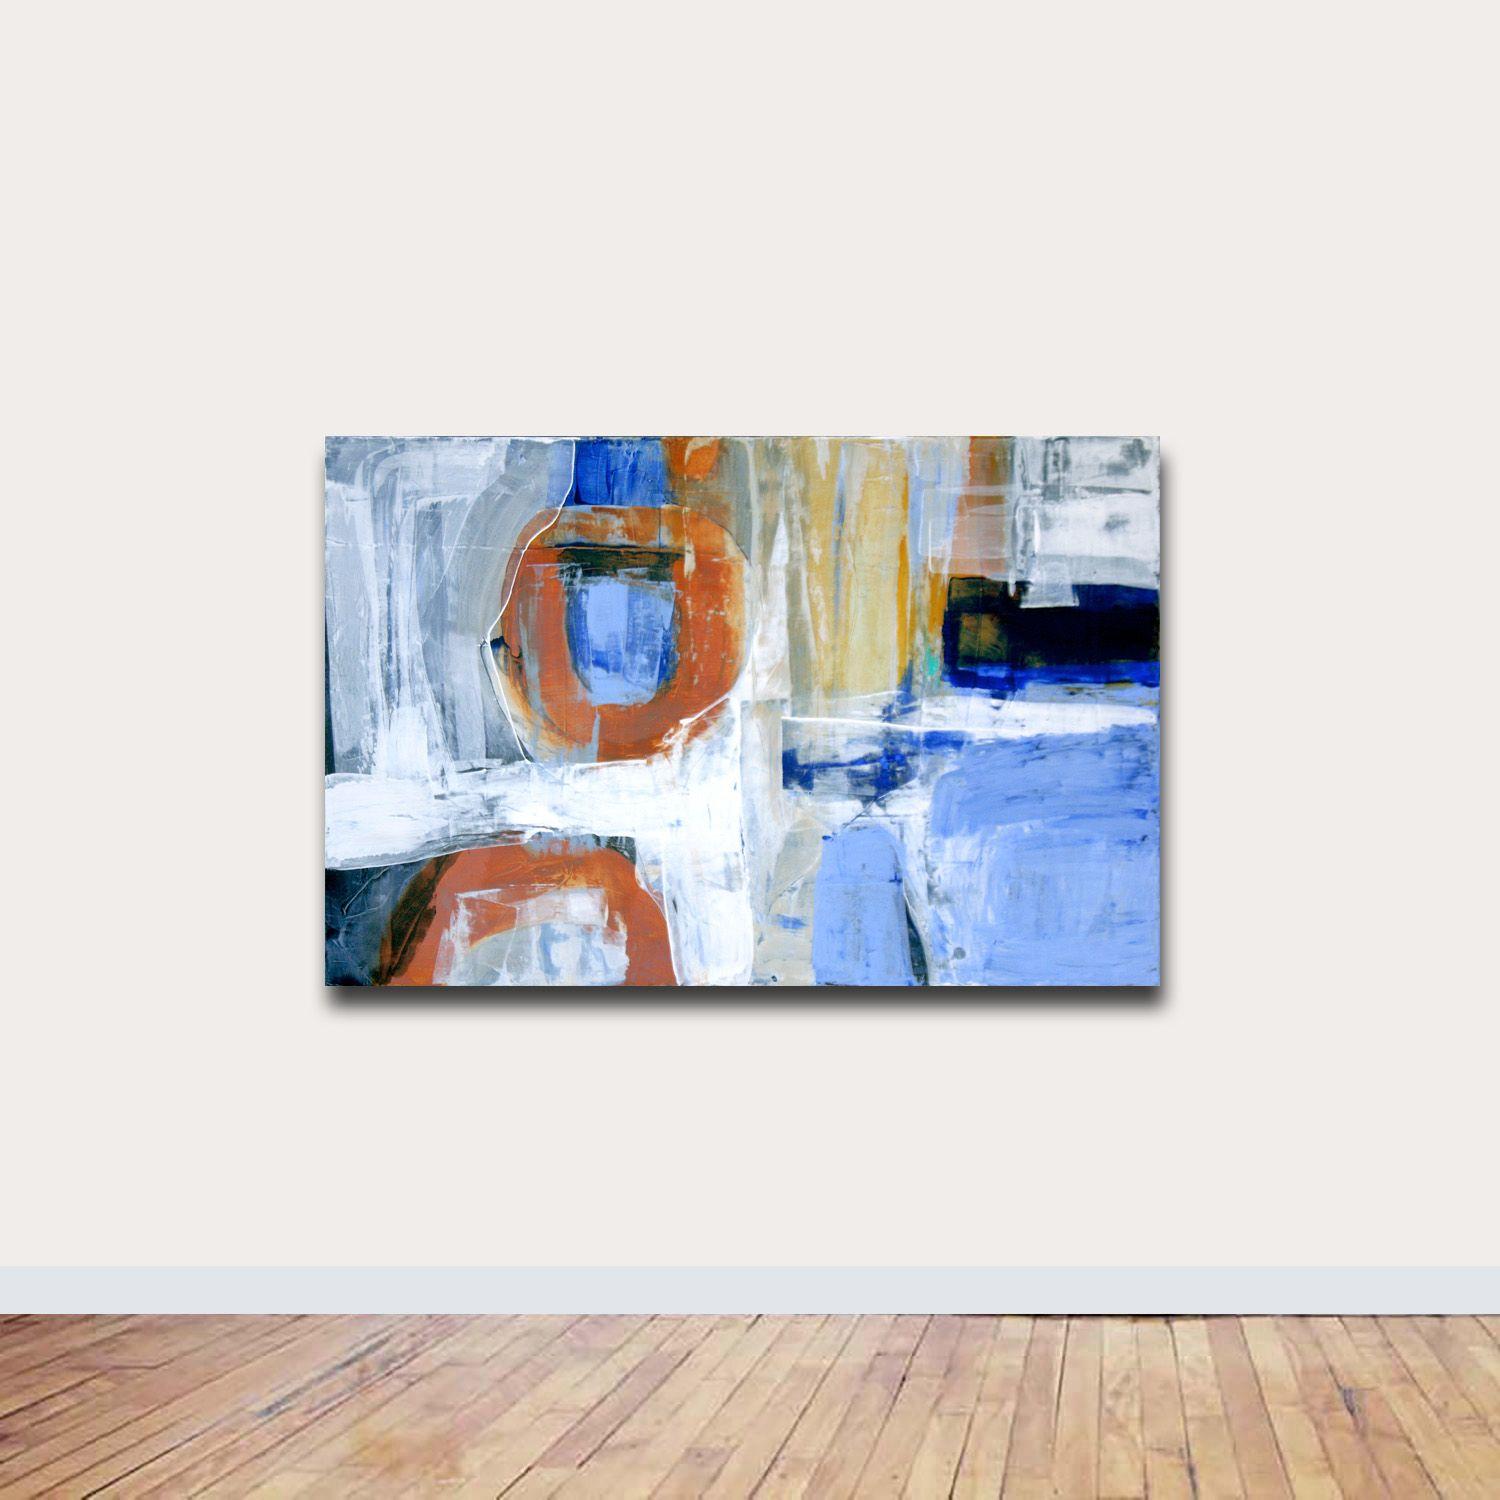 By The Wayside, modern expressionism abstract painting Colors in earthy neutrals, burnt sienna, ultramarine blue, yellow ochre, white, paynes gray and a hint of aqua.    This piece has vertical and horizontal orientations with signature on the